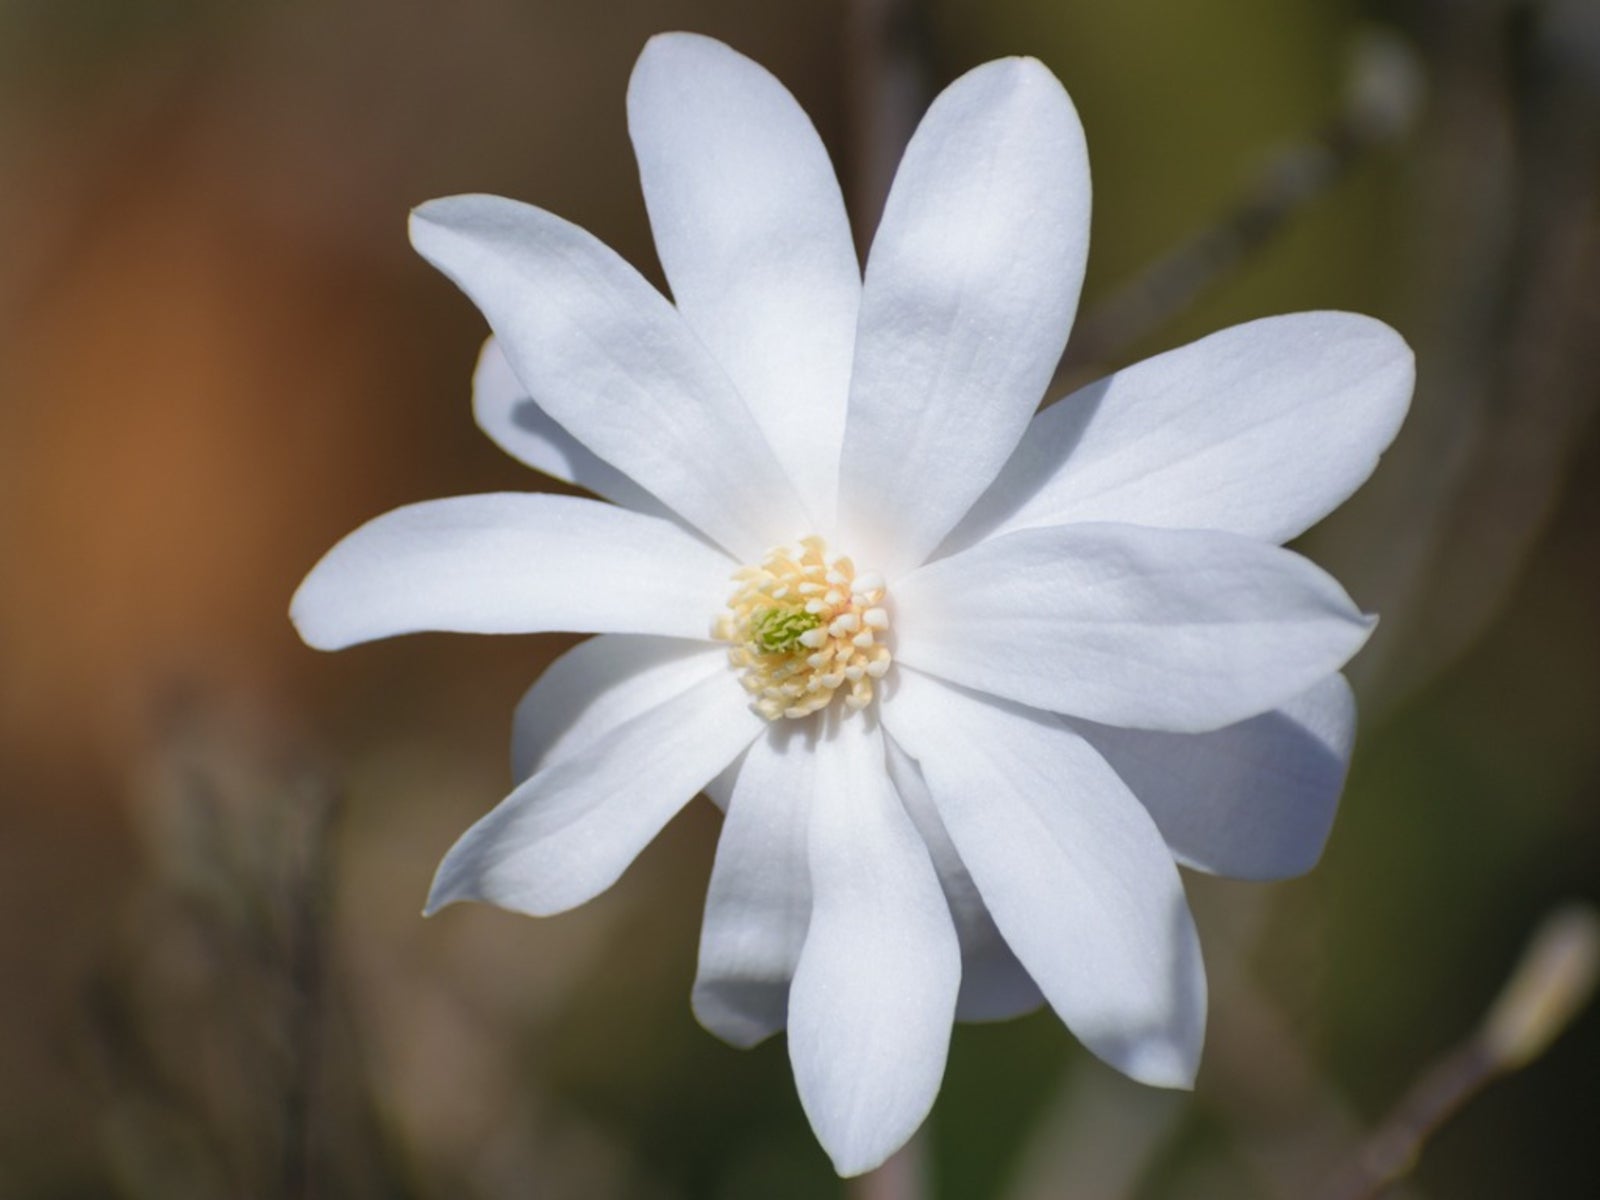 Star Magnolia Care Tips For Growing Star Magnolia Trees